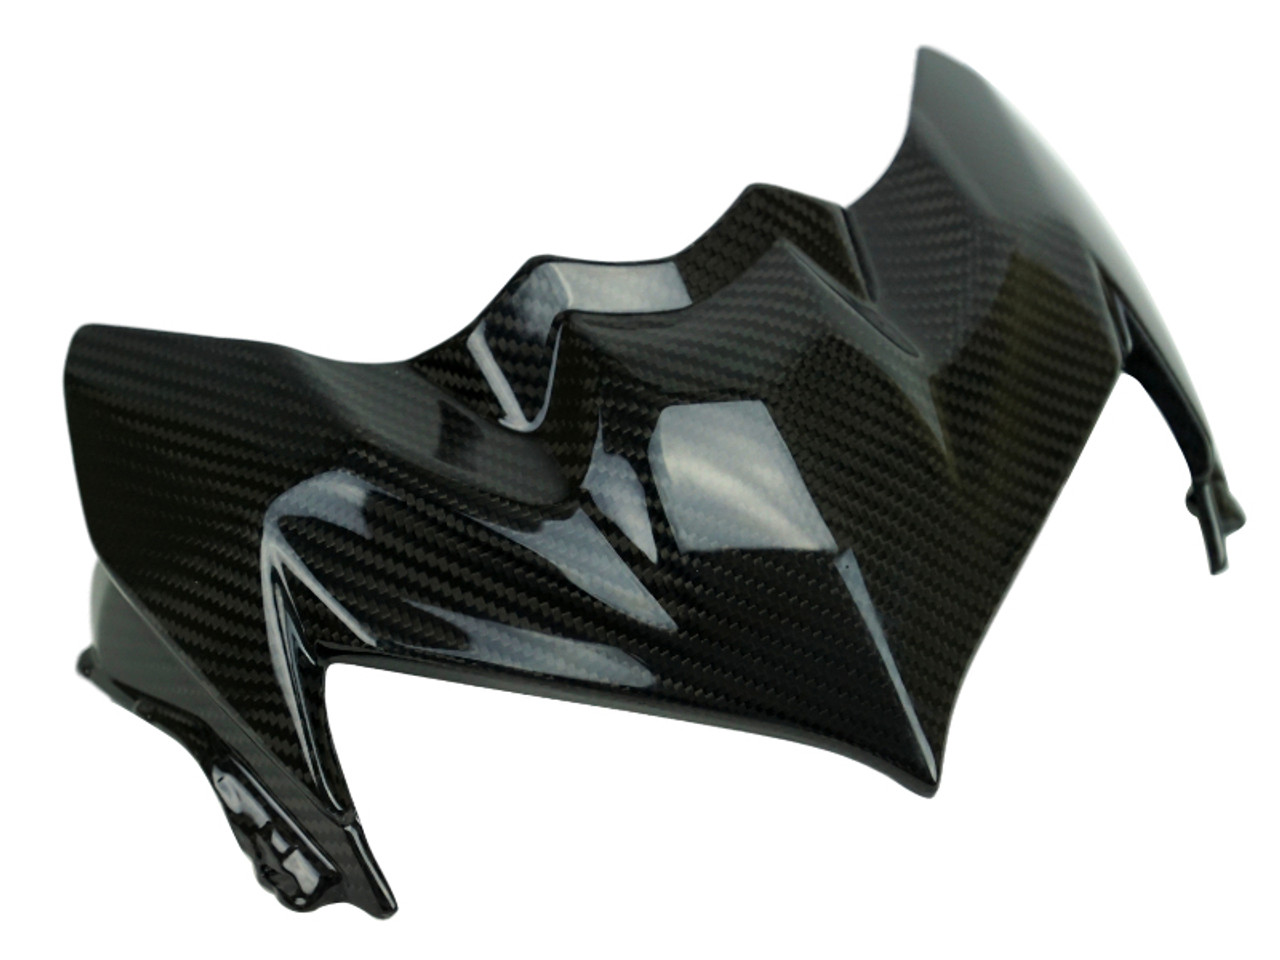 Front Fairing Upper in Glossy Twill Weave Carbon Fiber for Kawasaki Z900 2020+